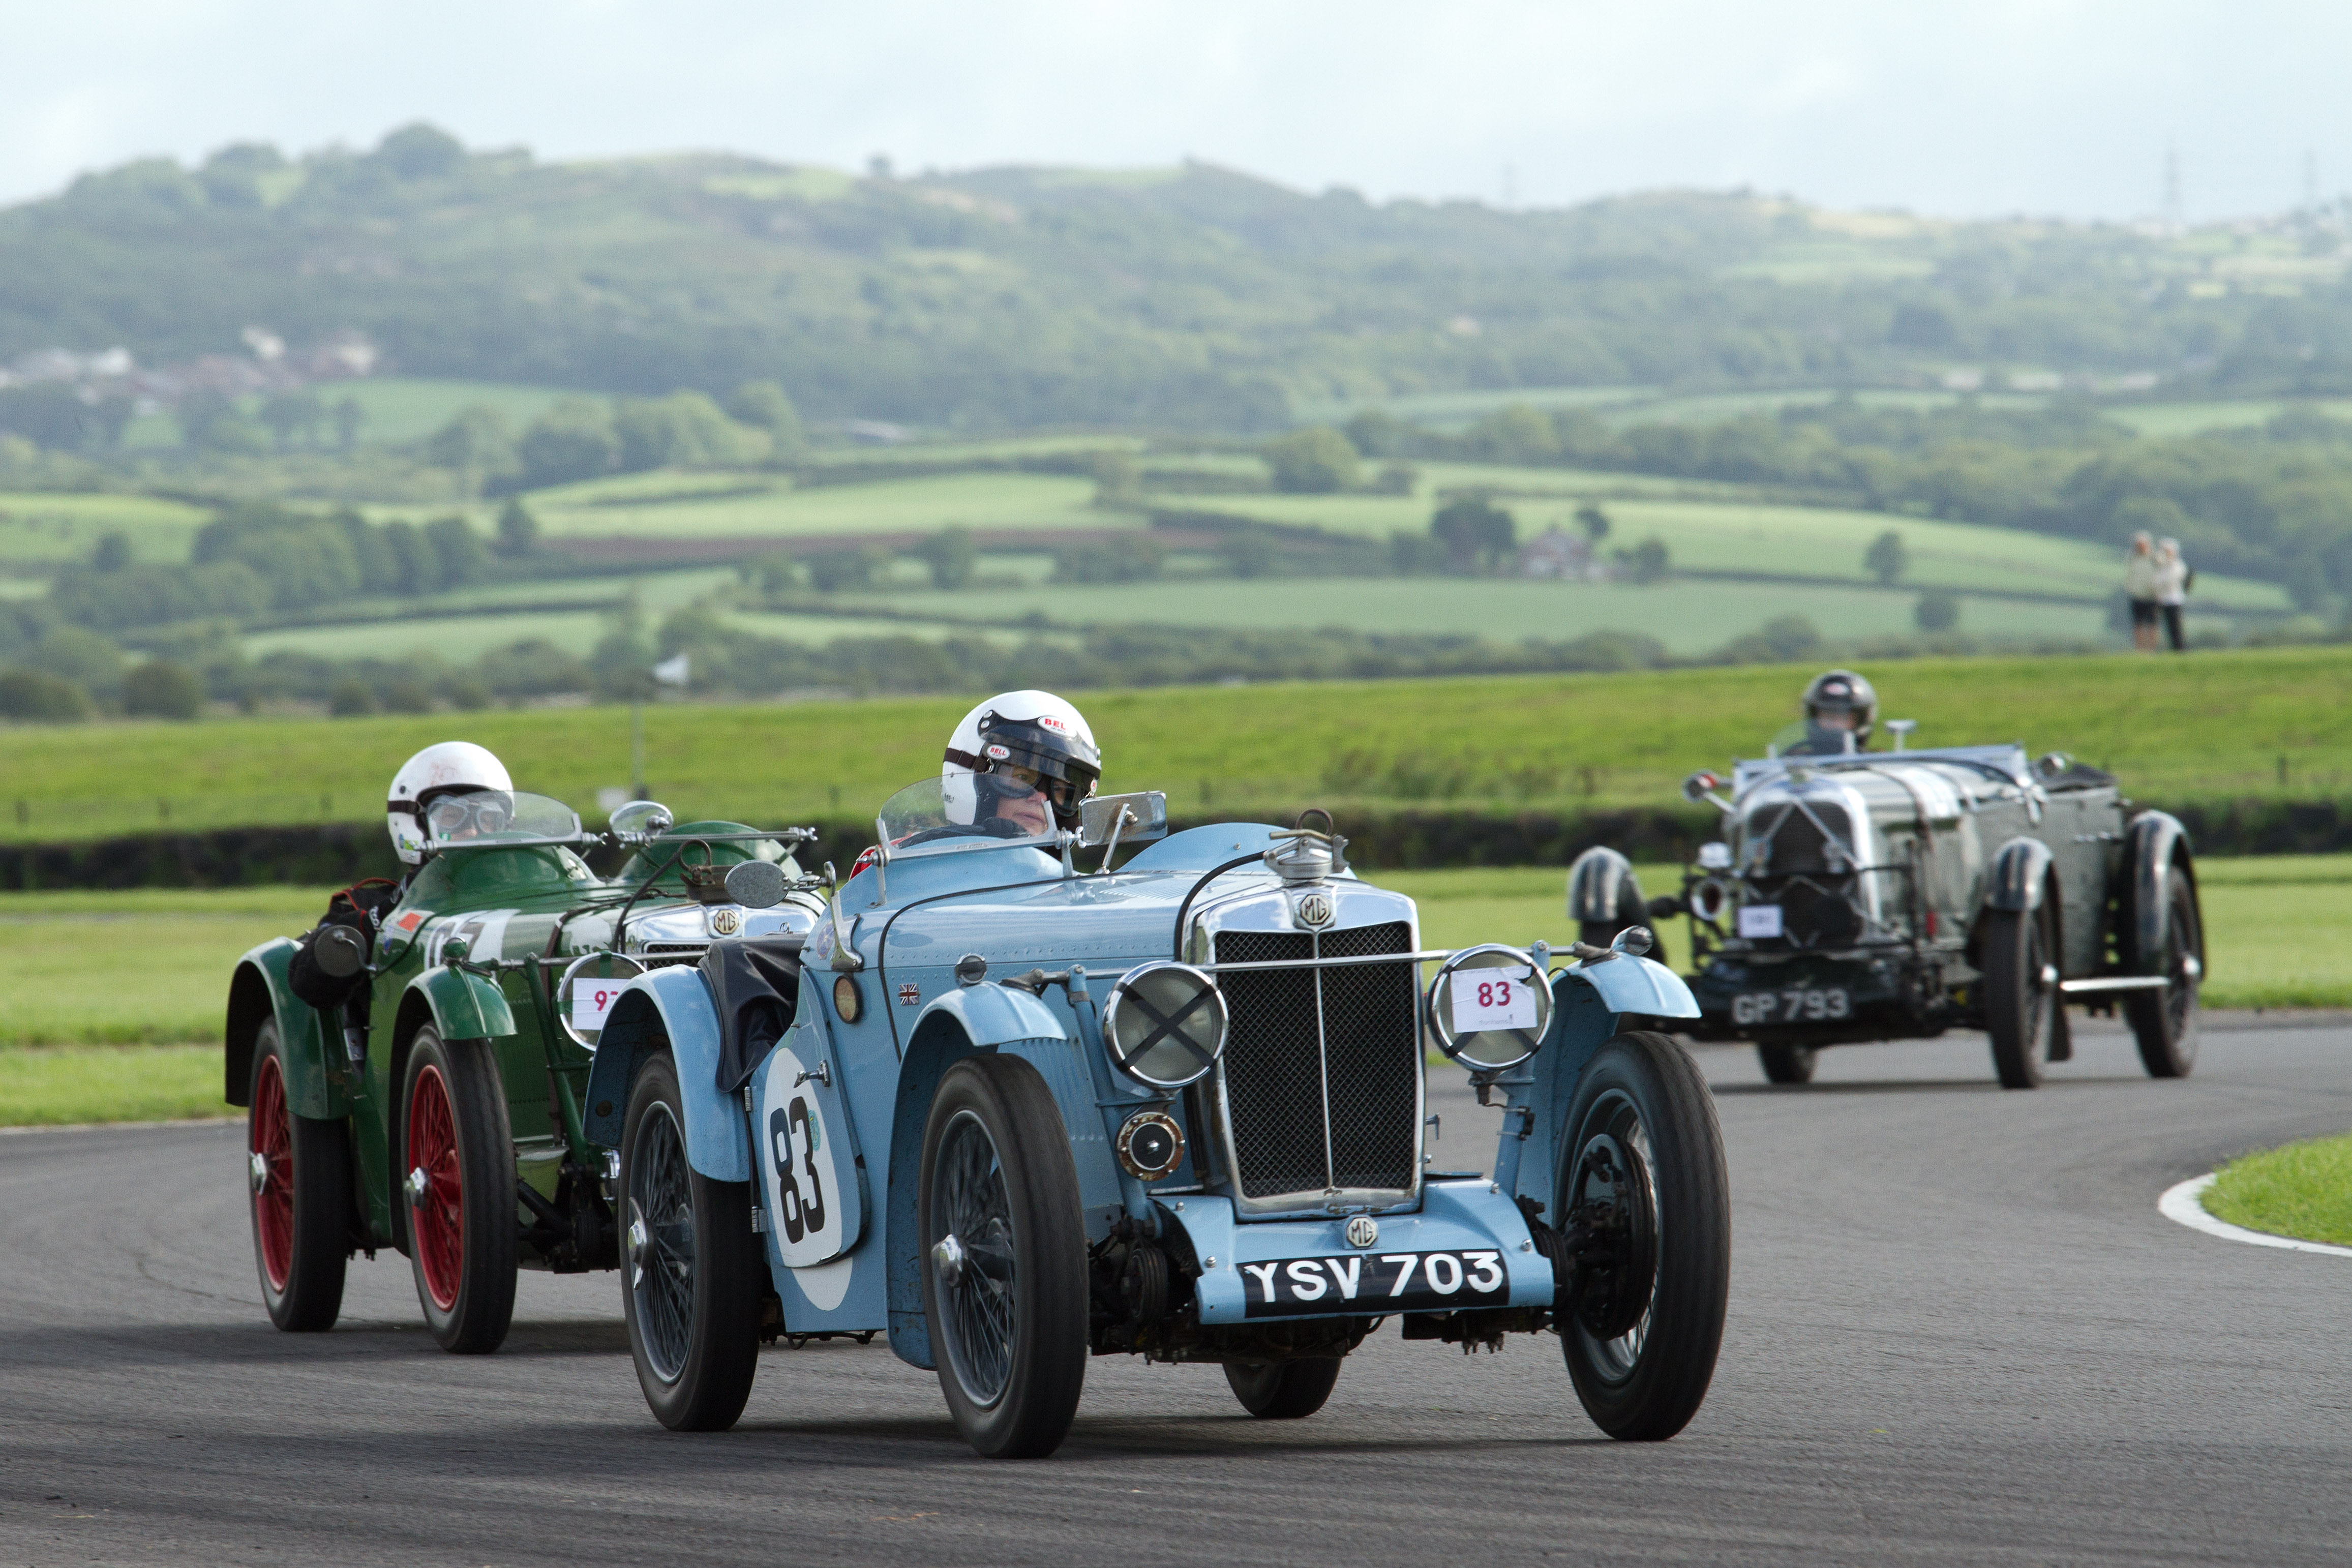 Entries close soon for the VSCC Welsh Speed Weekend, Pembrey, 28/29 June 2014 - Deadline Extended! cover